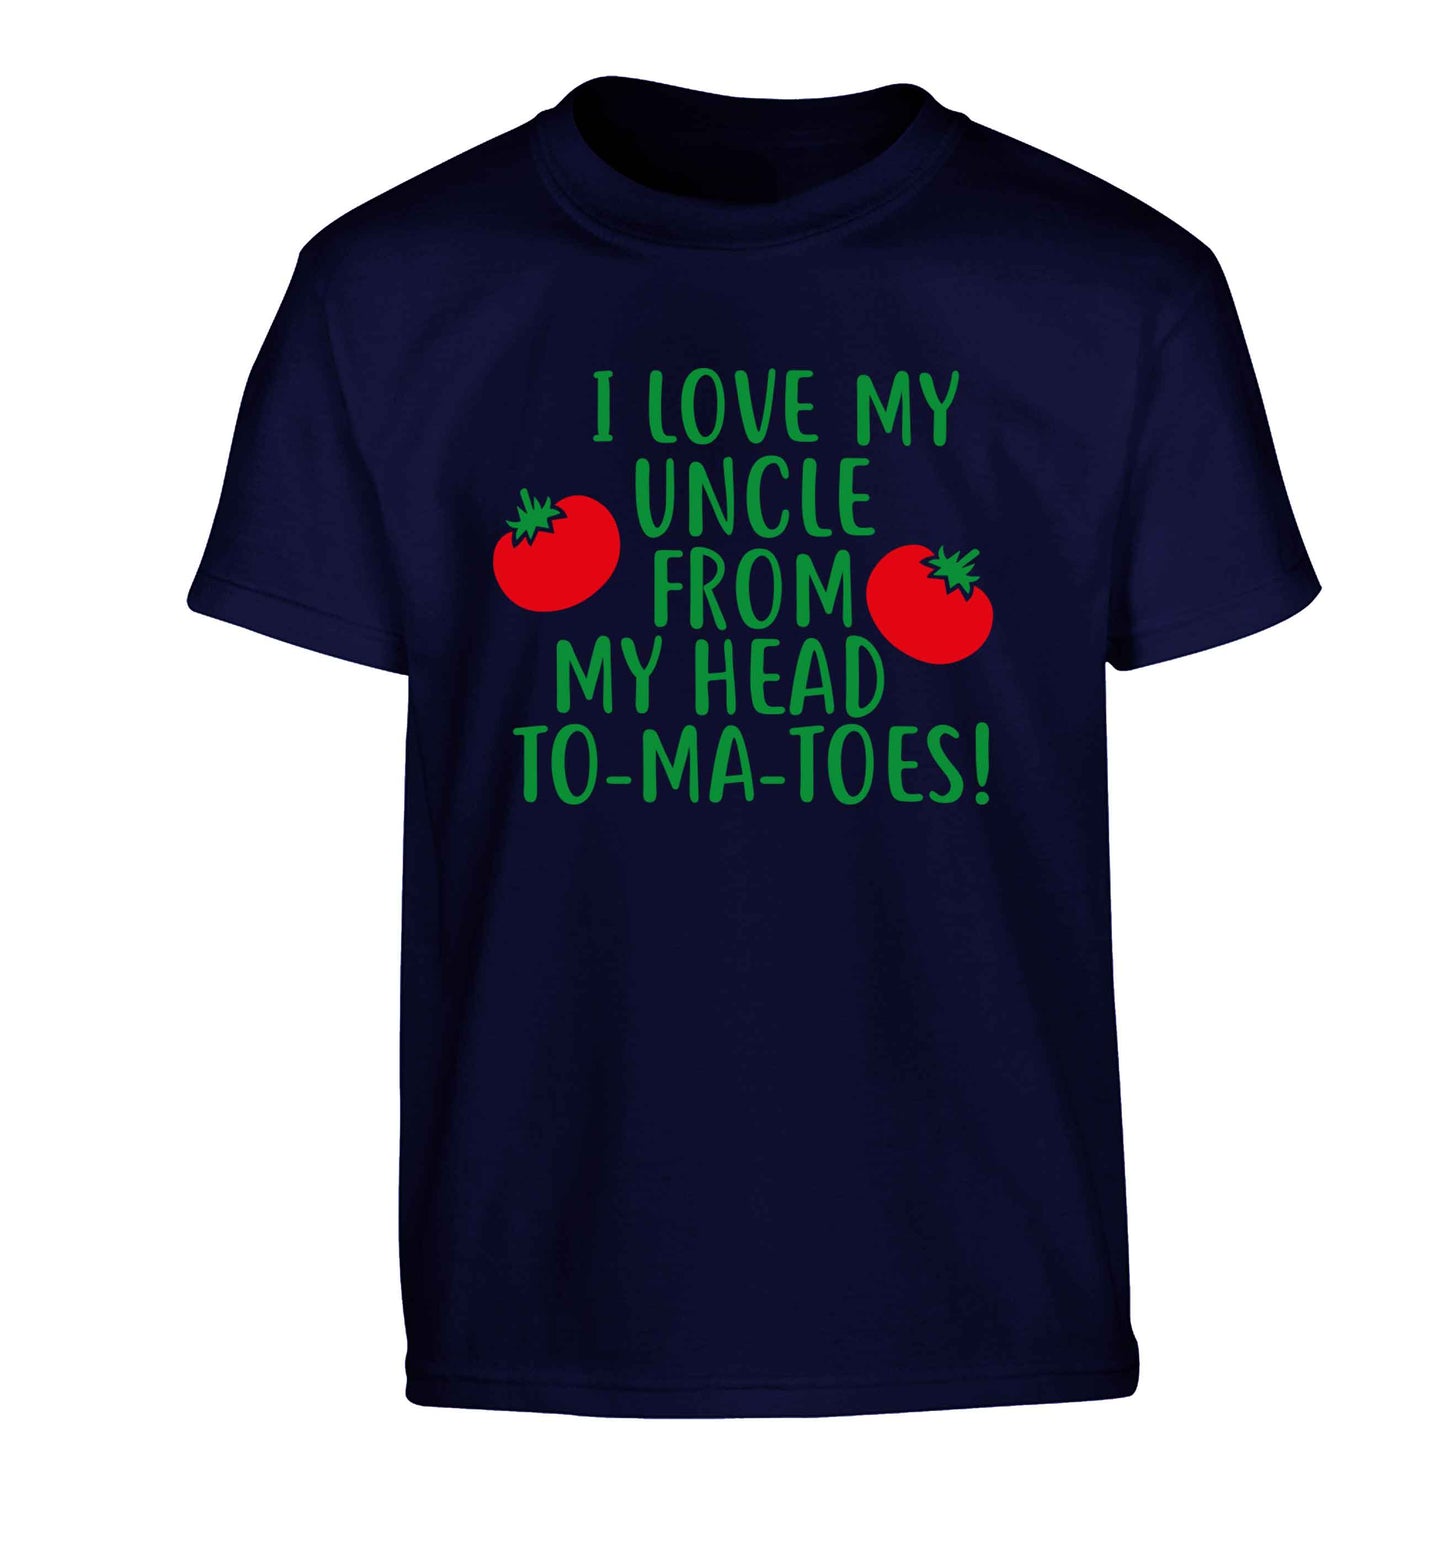 I love my uncle from my head To-Ma-Toes Children's navy Tshirt 12-13 Years